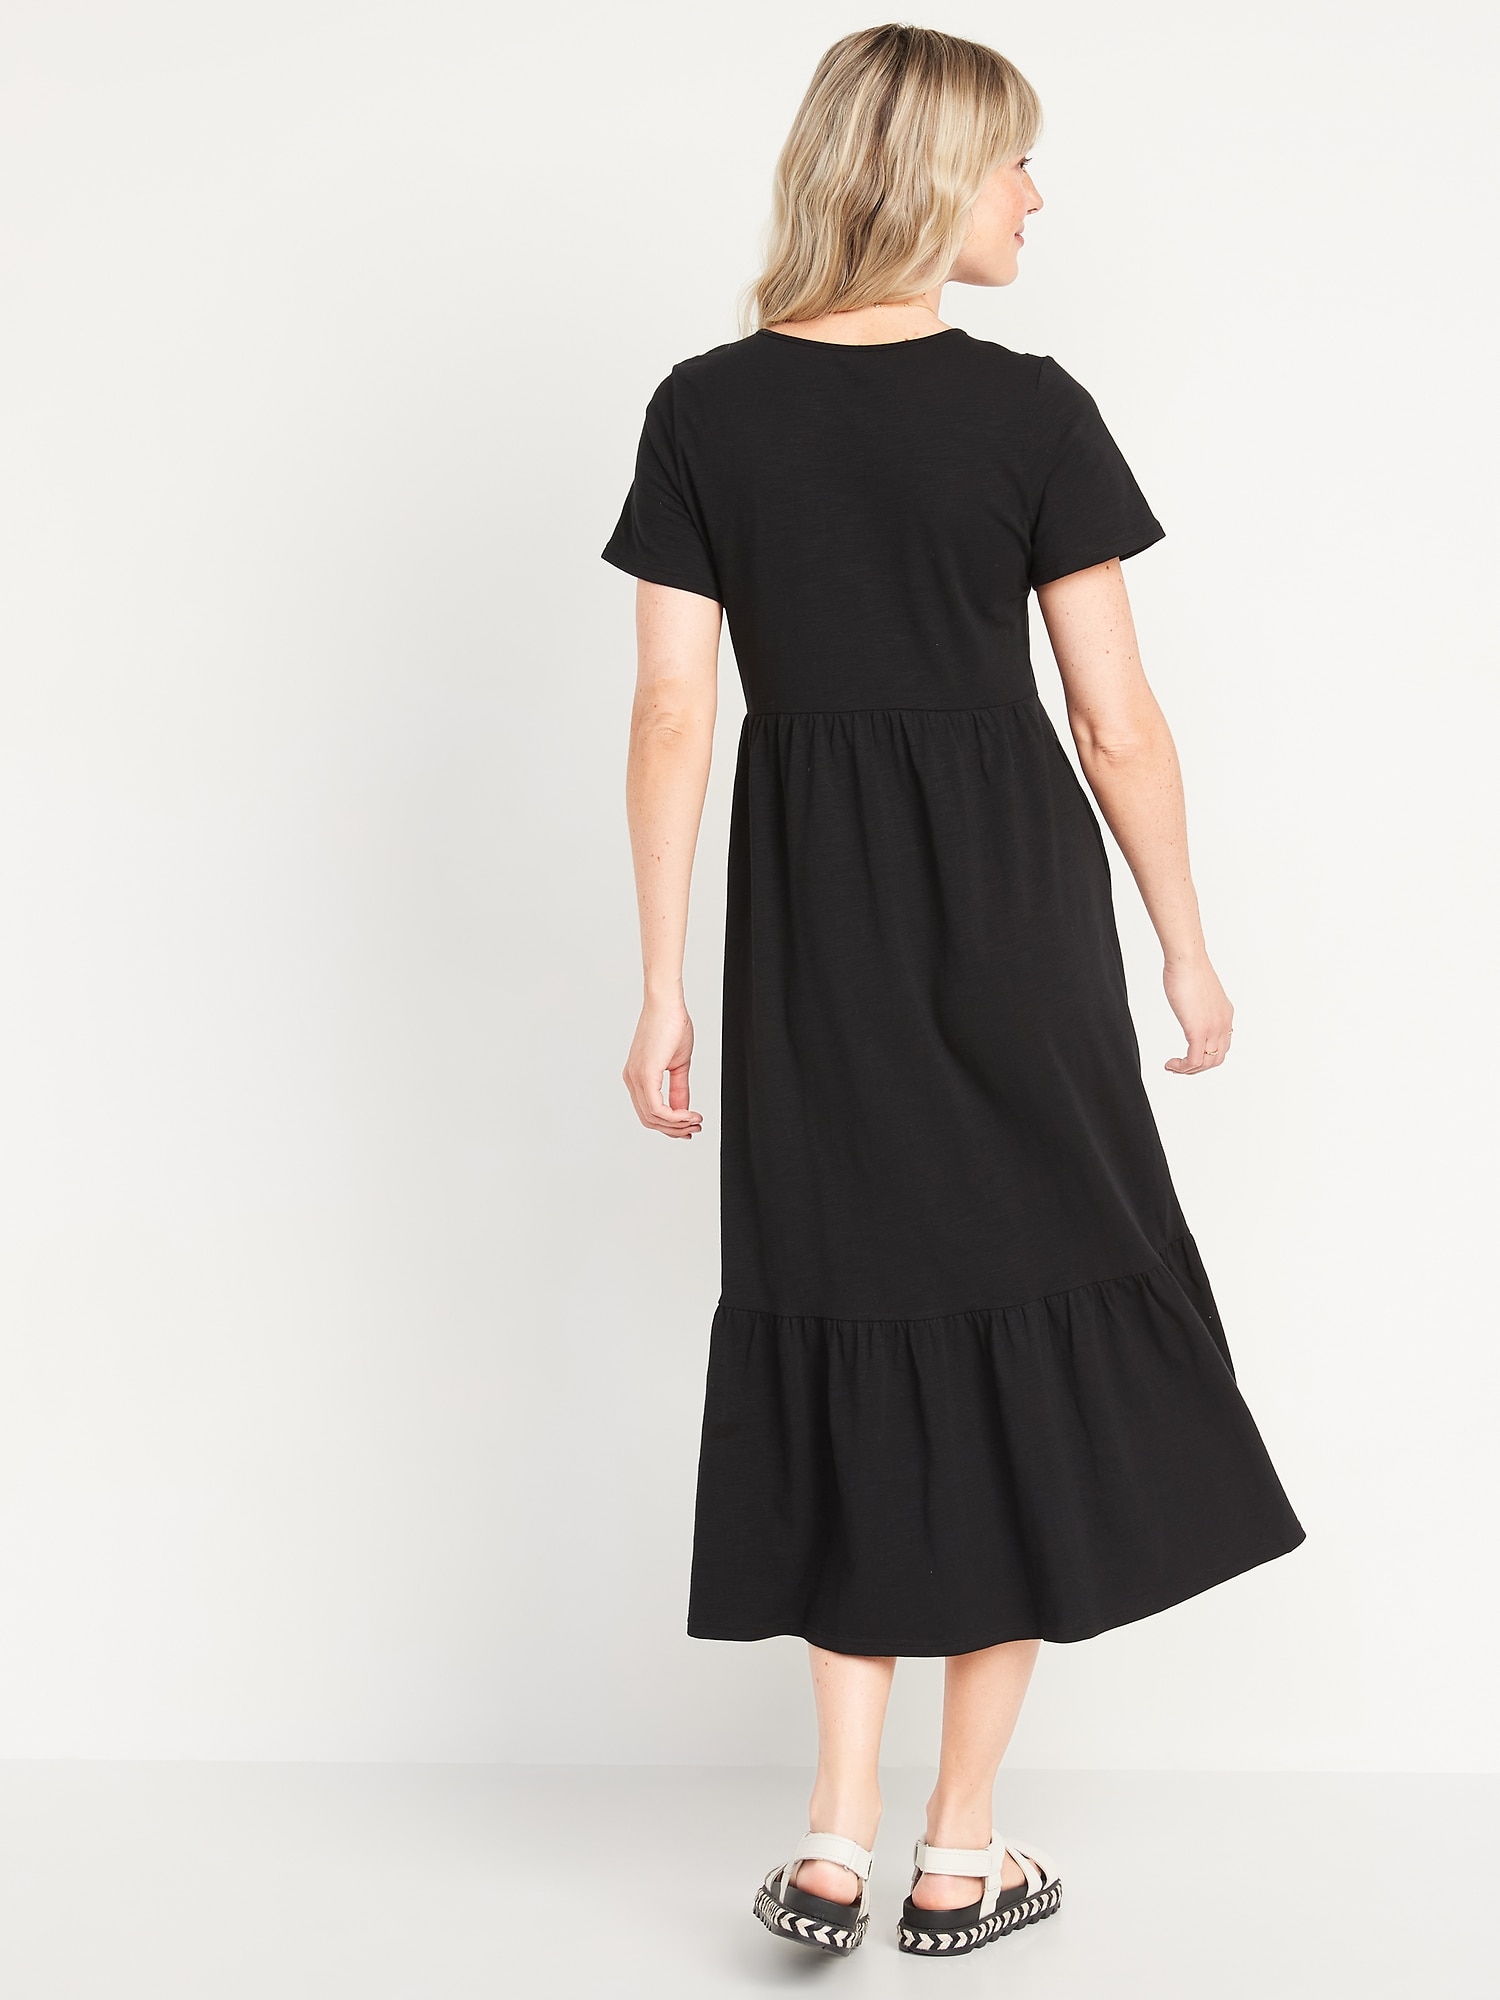 Will Colleen midi dress work on size 6 or 8? Like L or Xl? : r